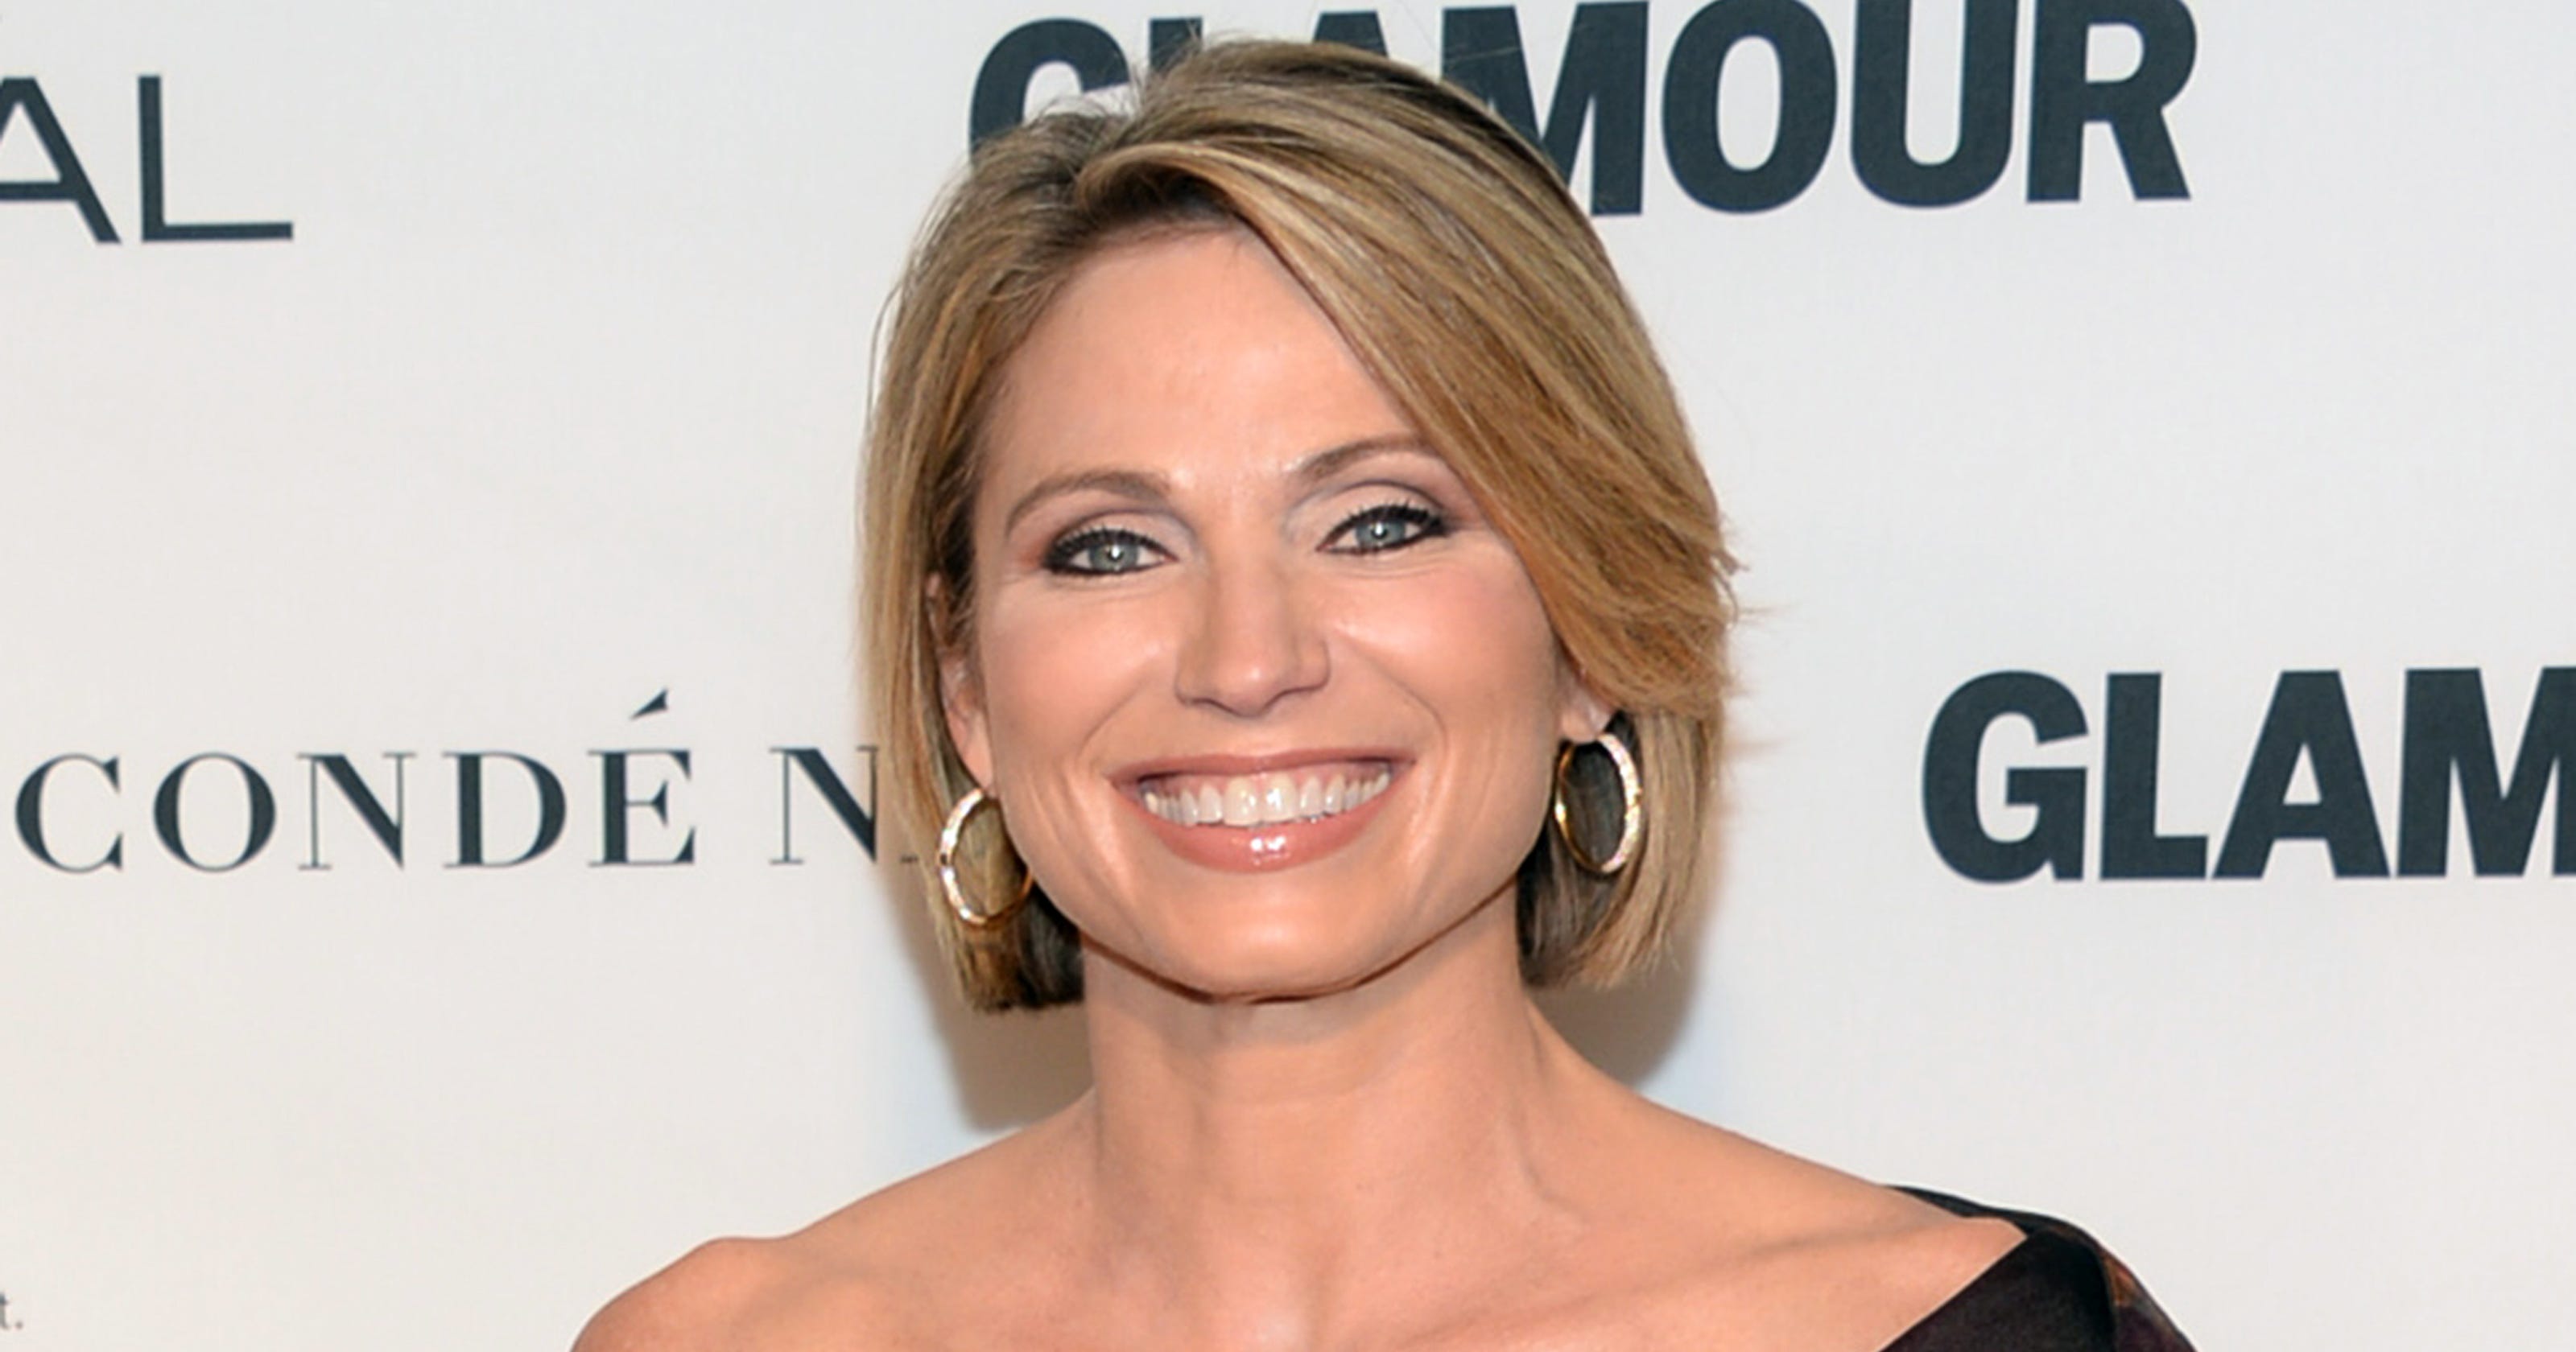 Gmas Amy Robach Apologizes For On Air Racial Slur Says It Was A